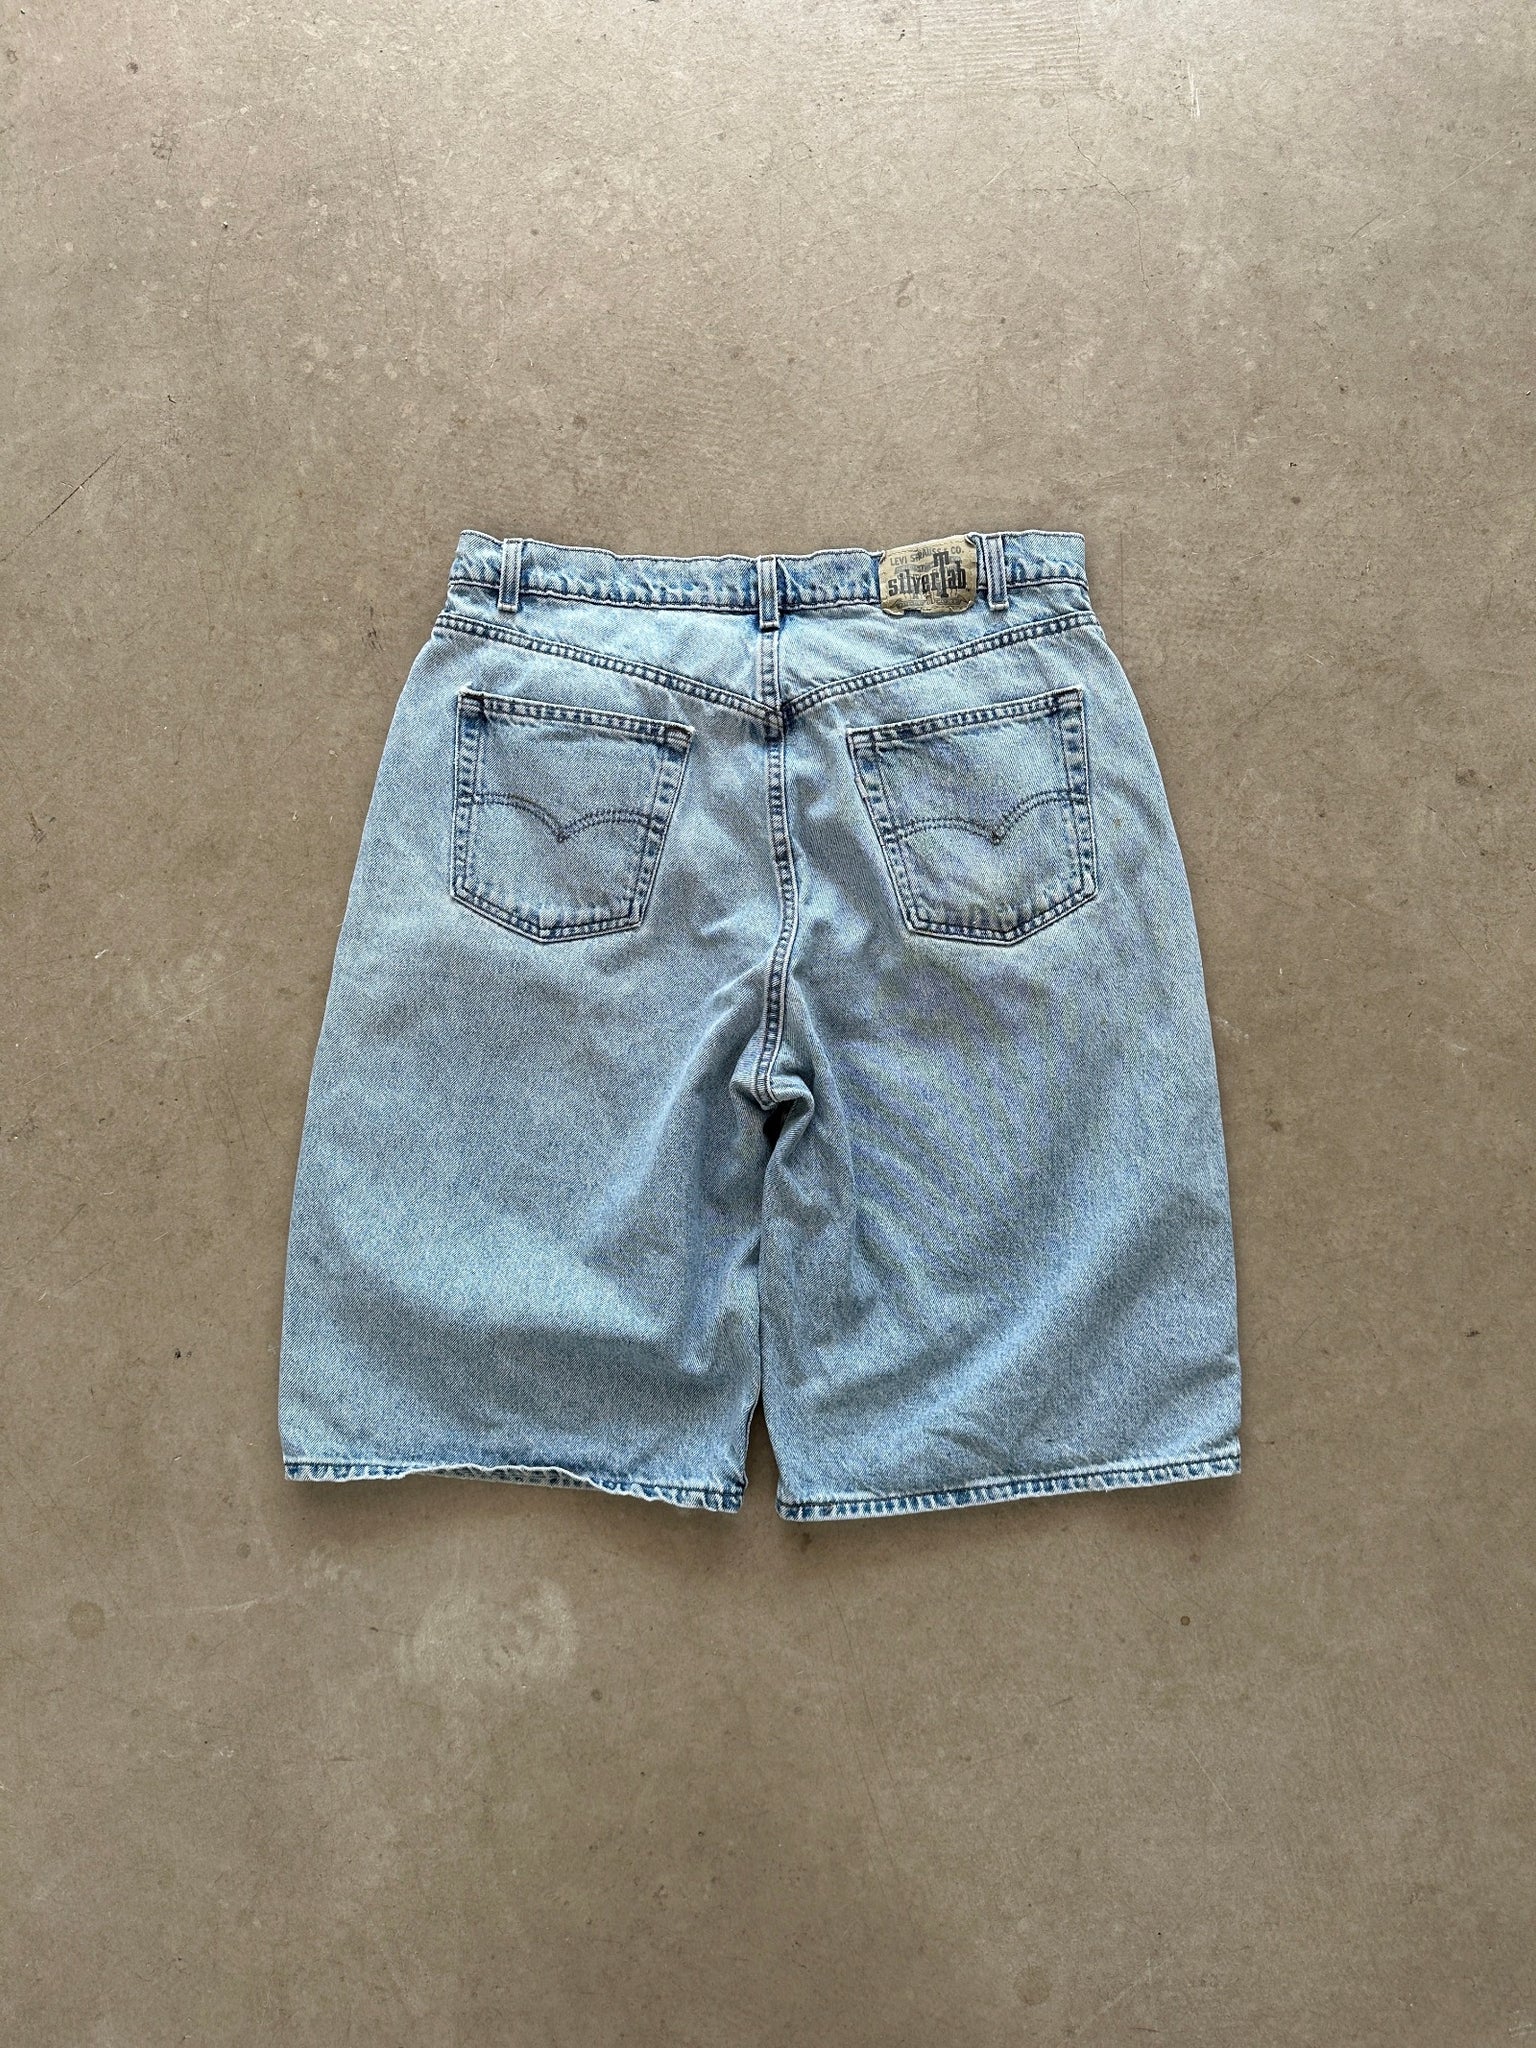 1991 Levi's Silver Tab Baggy Shorts - 38